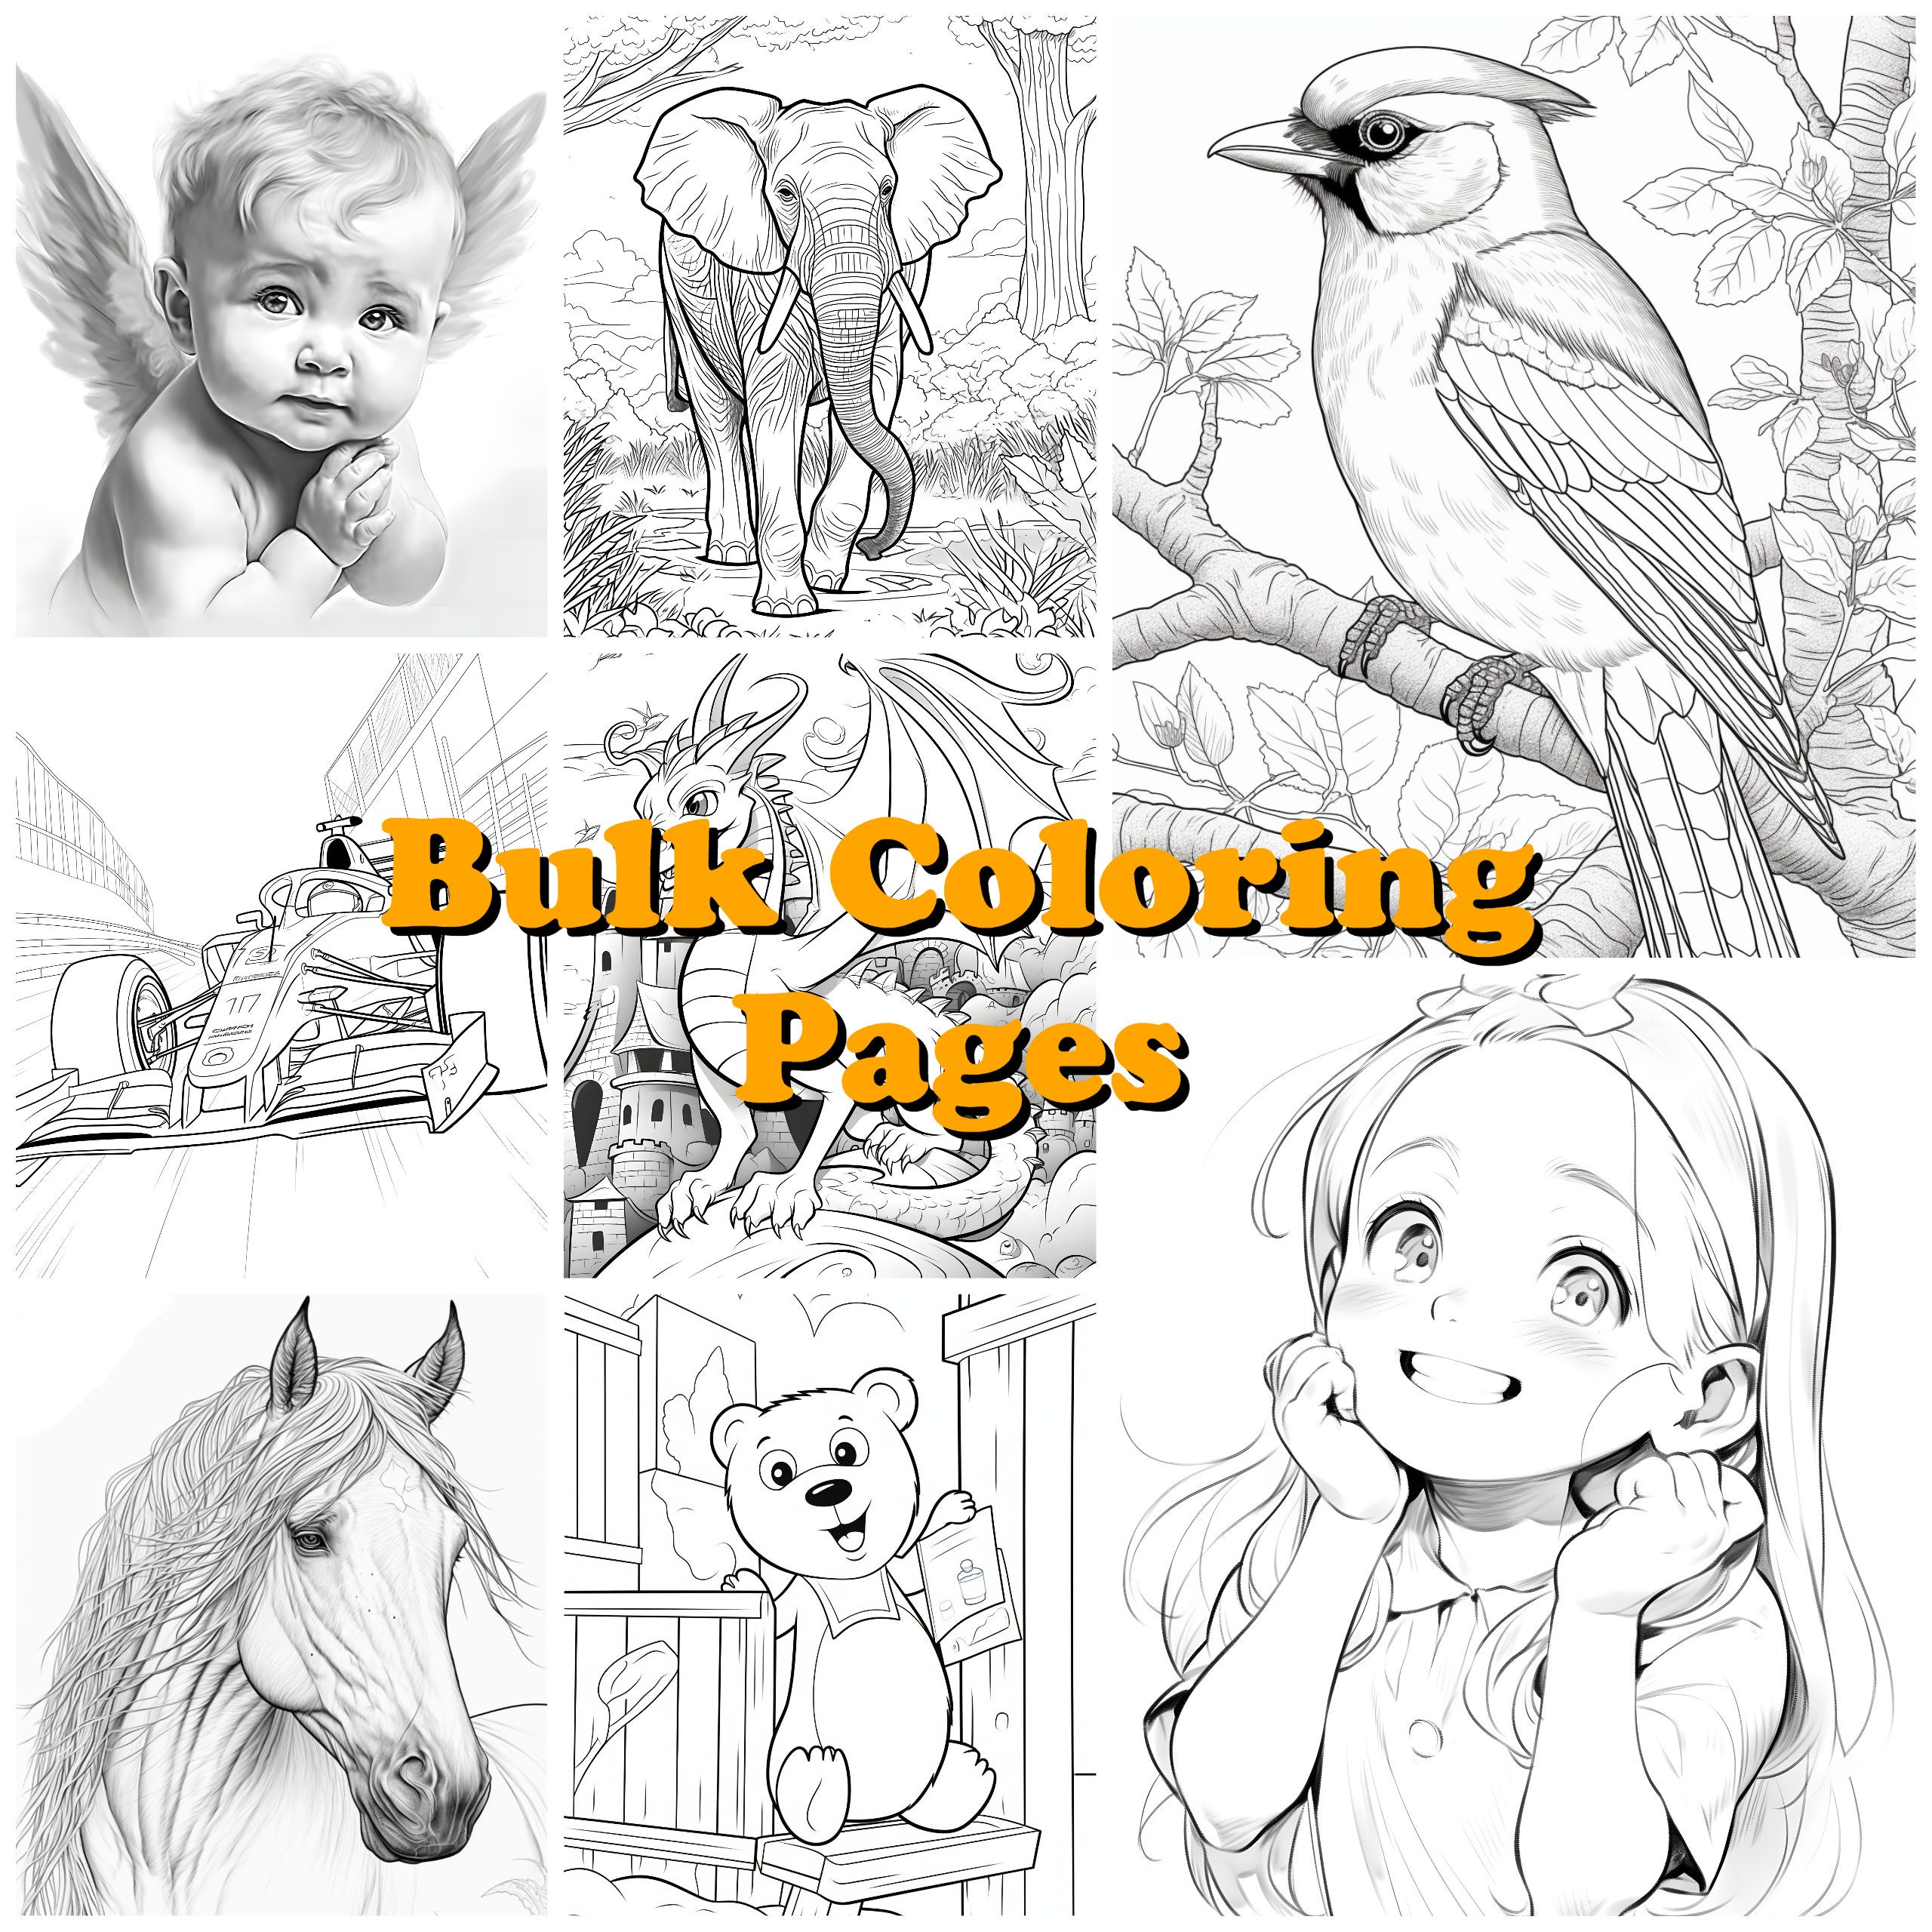 10 Coloring Page Titles for 60% Less. Bulk Order and Save 